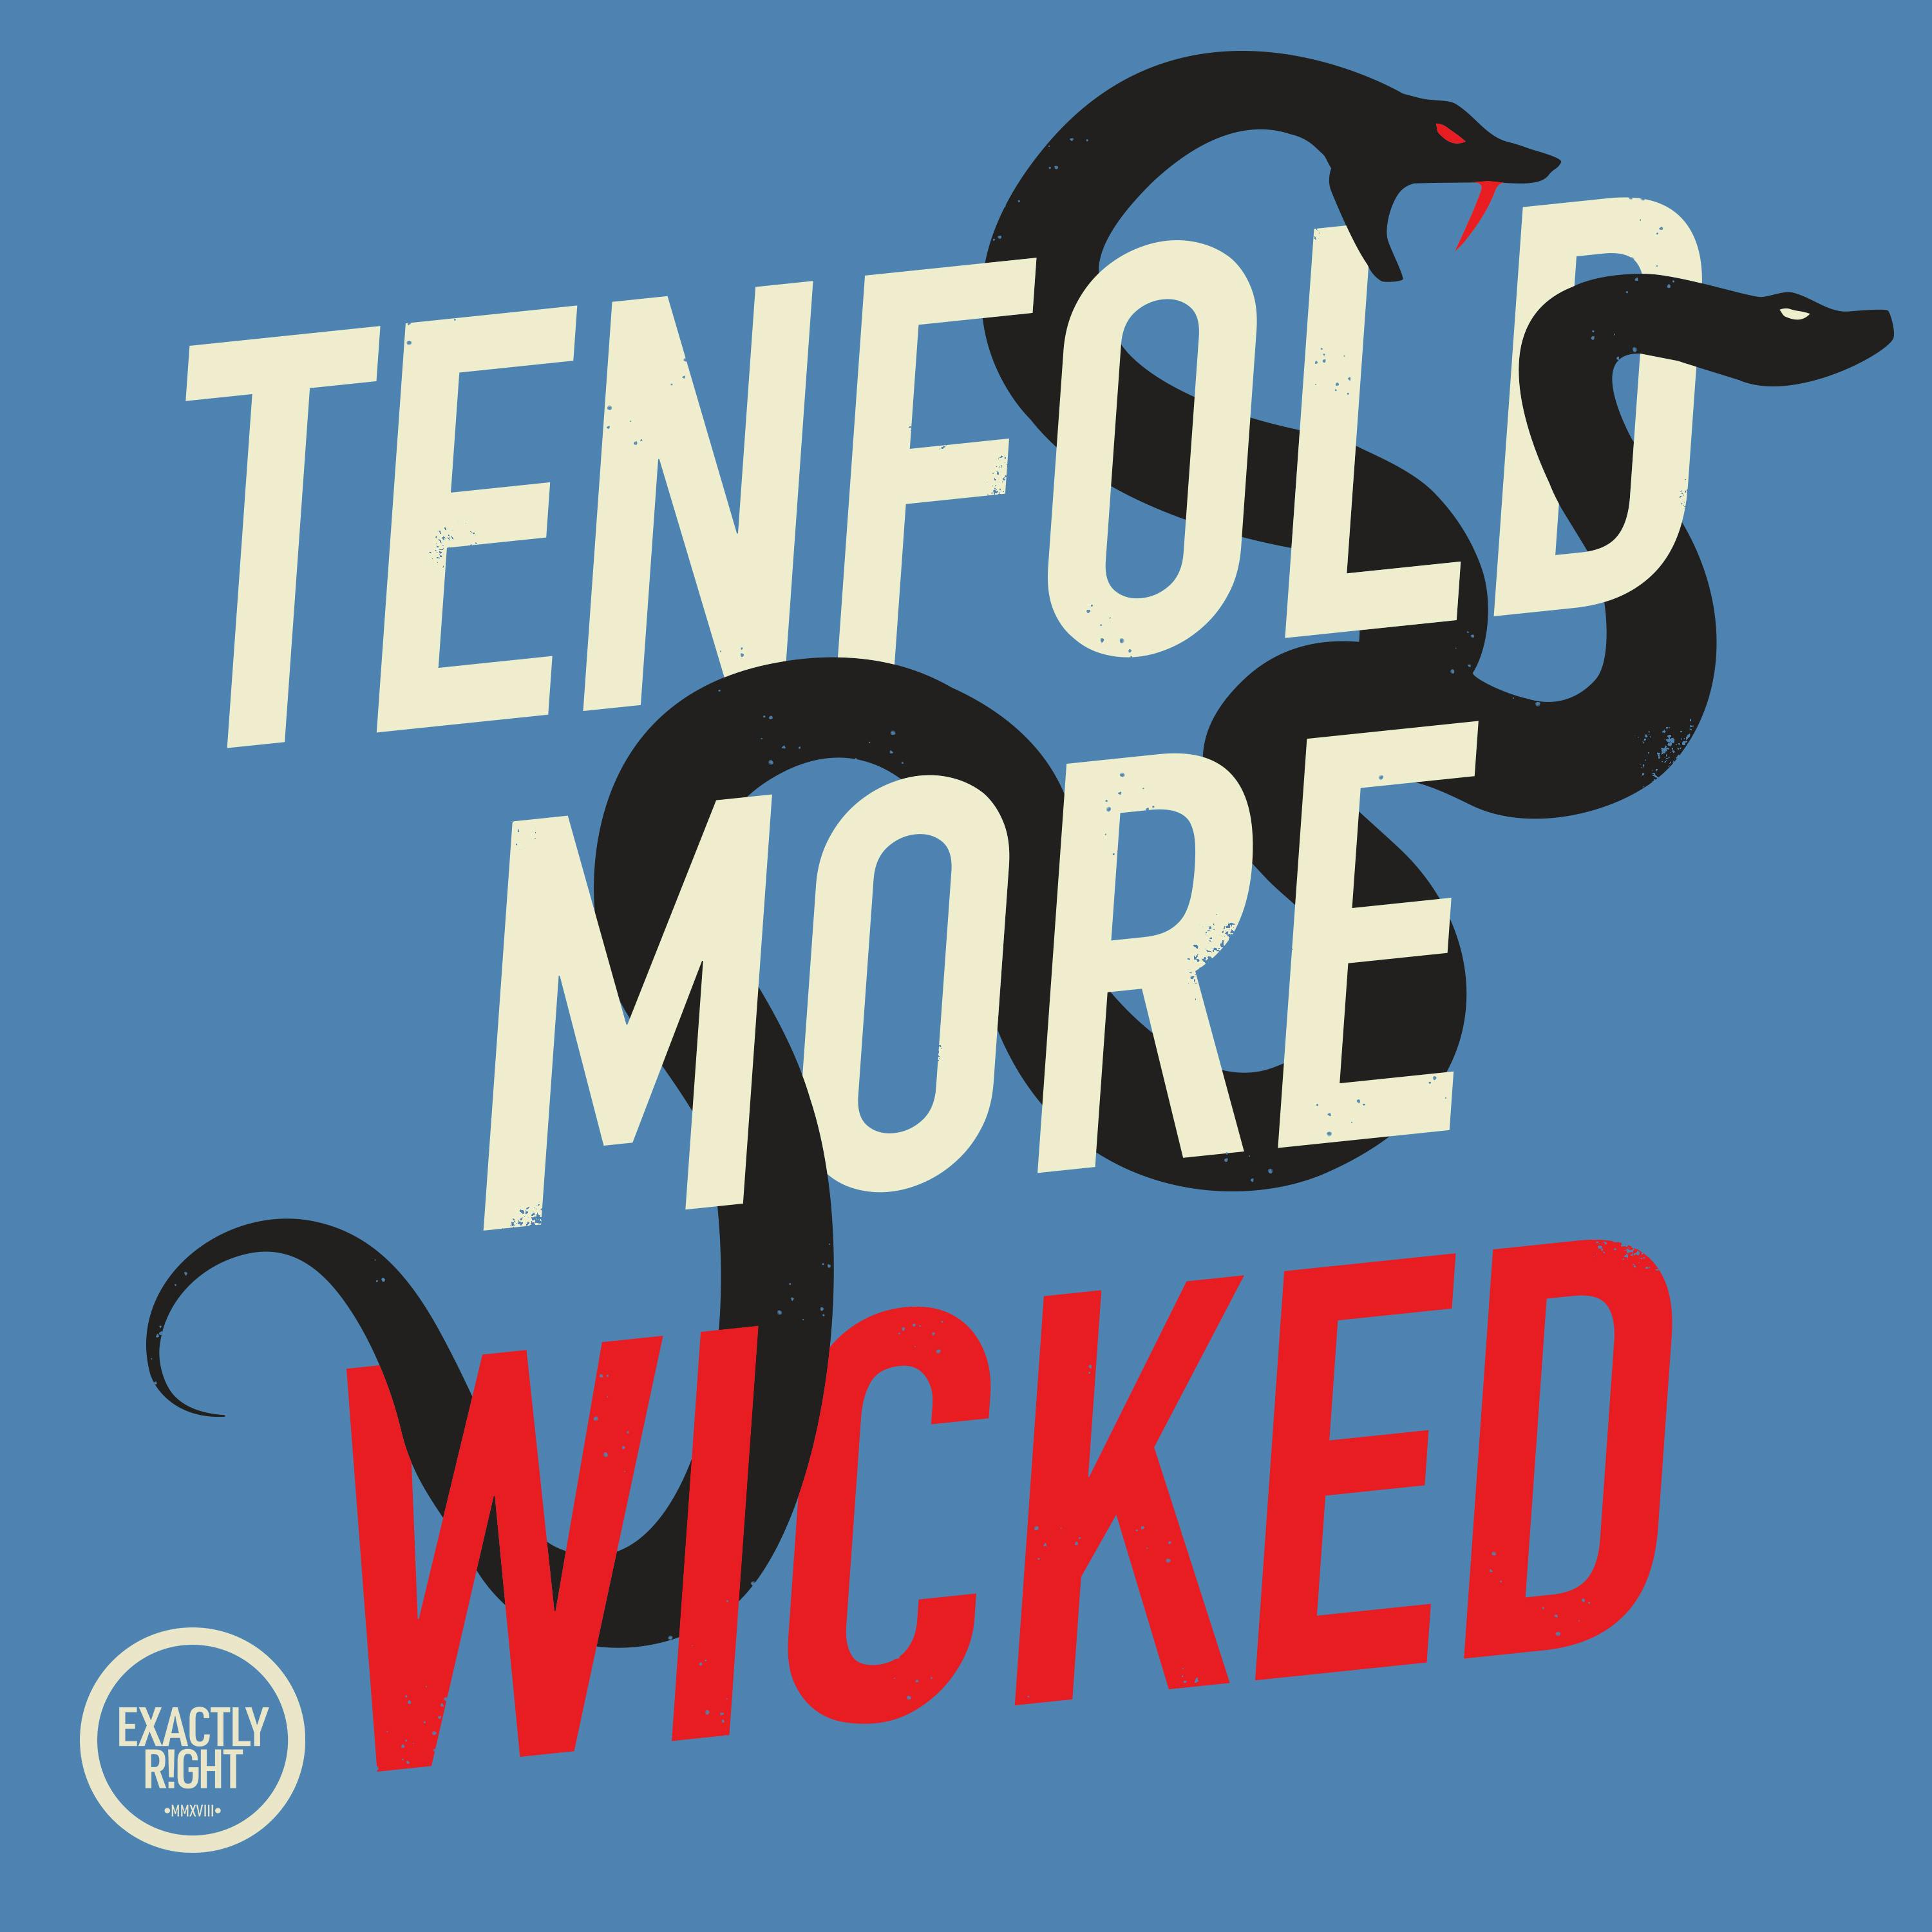 Tenfold More Wicked - A Blessing and a Curse: Drowning